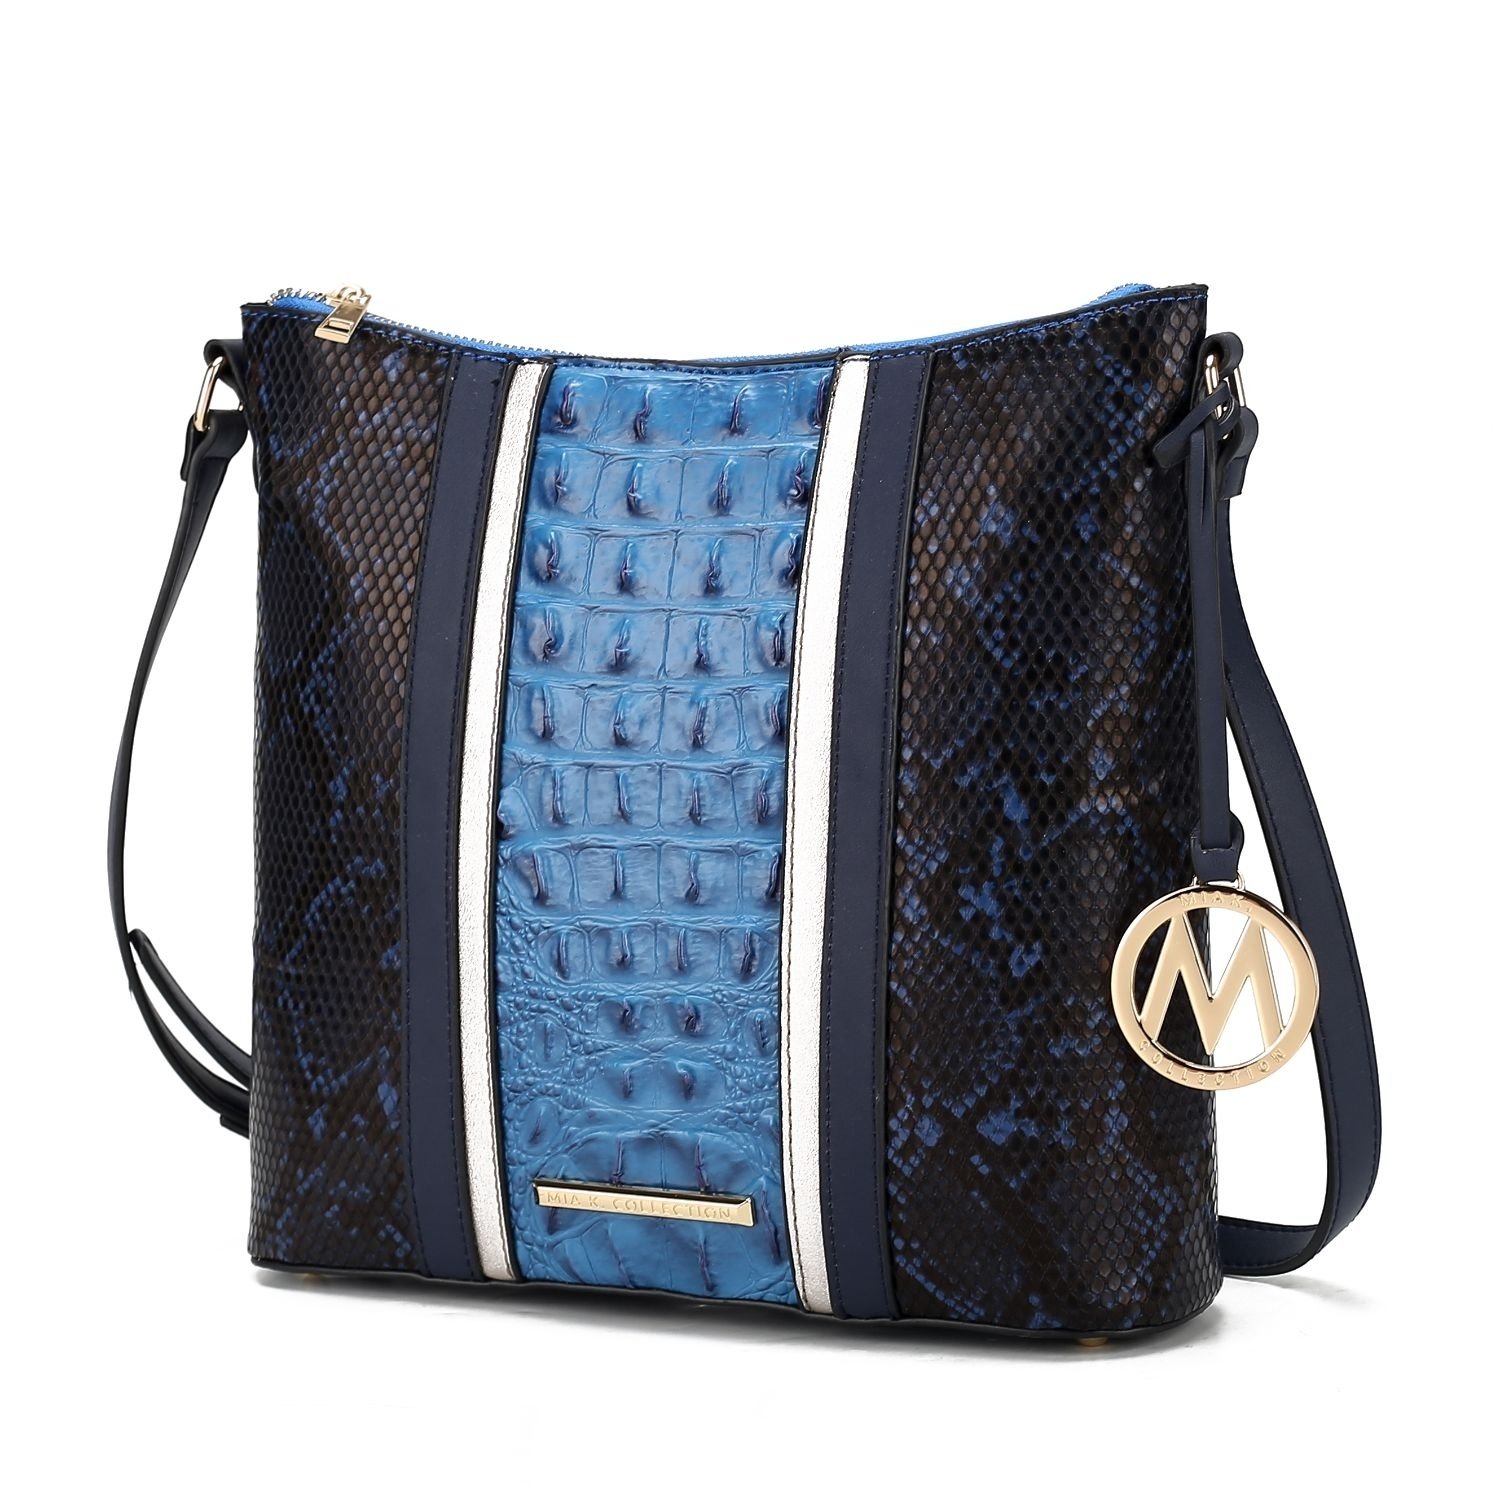 MKF Collection Meline Faux Crocodile And Snake Embossed Vegan Leather Women's Shoulder Bag By Mia K - Navy